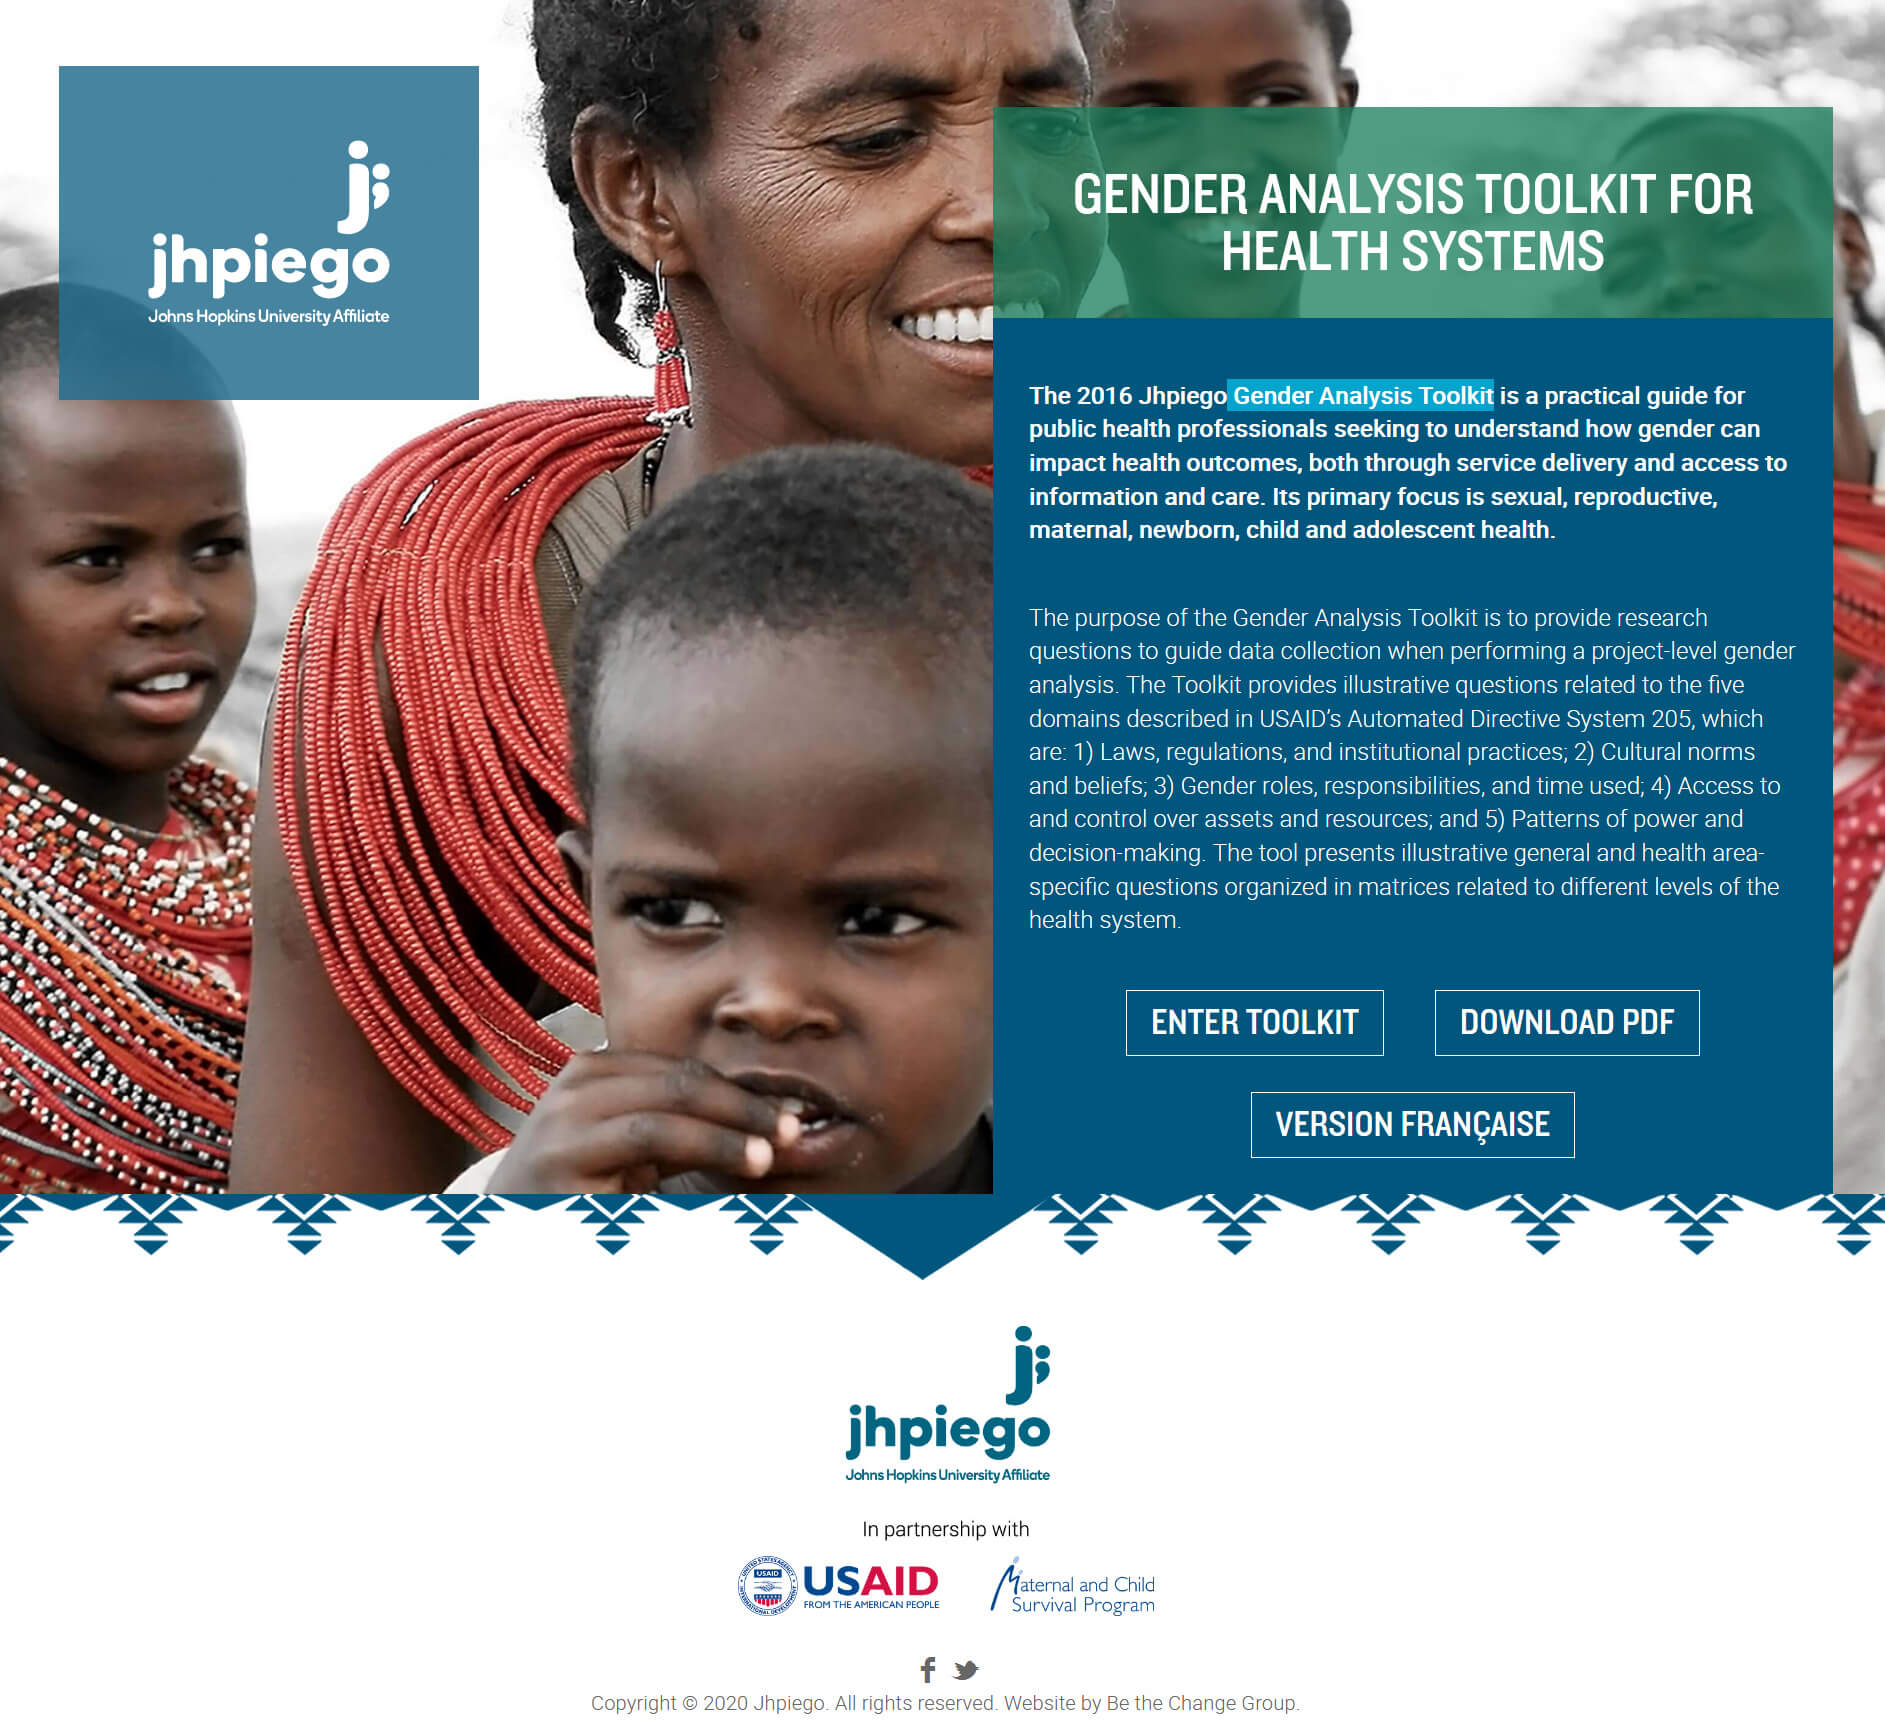 Gender analysis toolkit for health systems